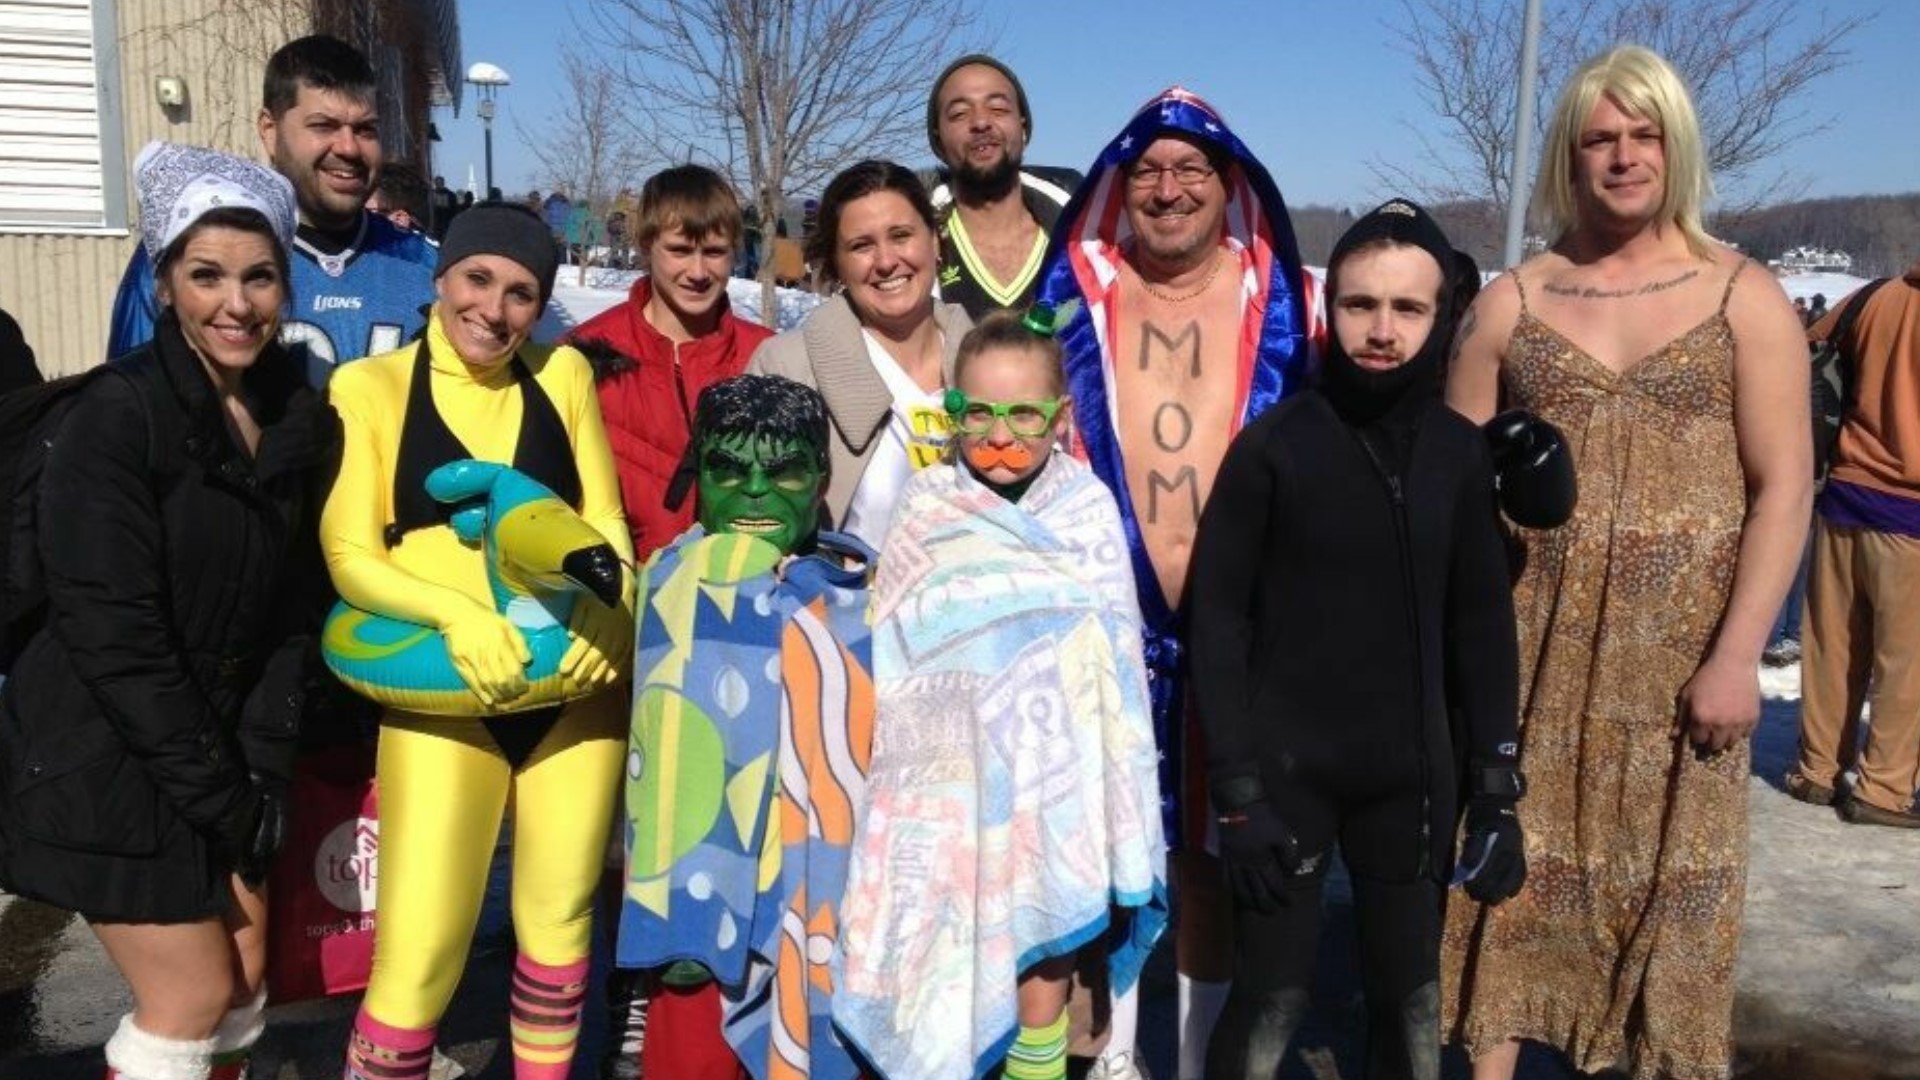 The Everdry owner has been doing SOMI's Polar Plunge event for 10 years.